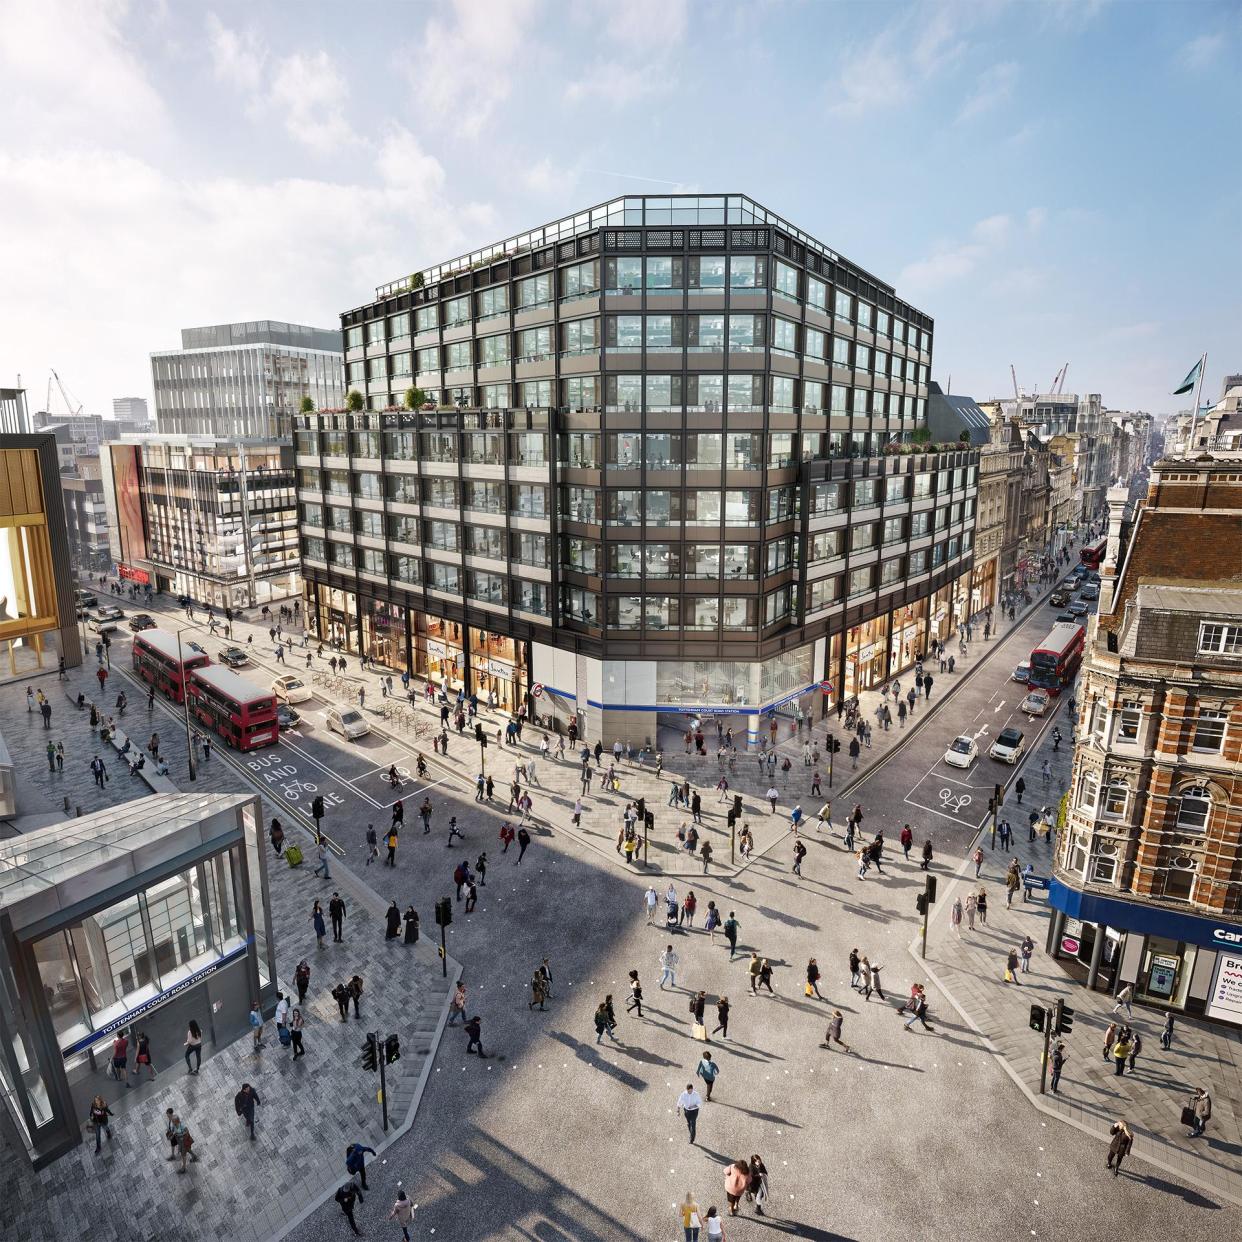 Derwent London is set to create a new development called Soho Place on the corner of Oxford Street and Charing Cross Road